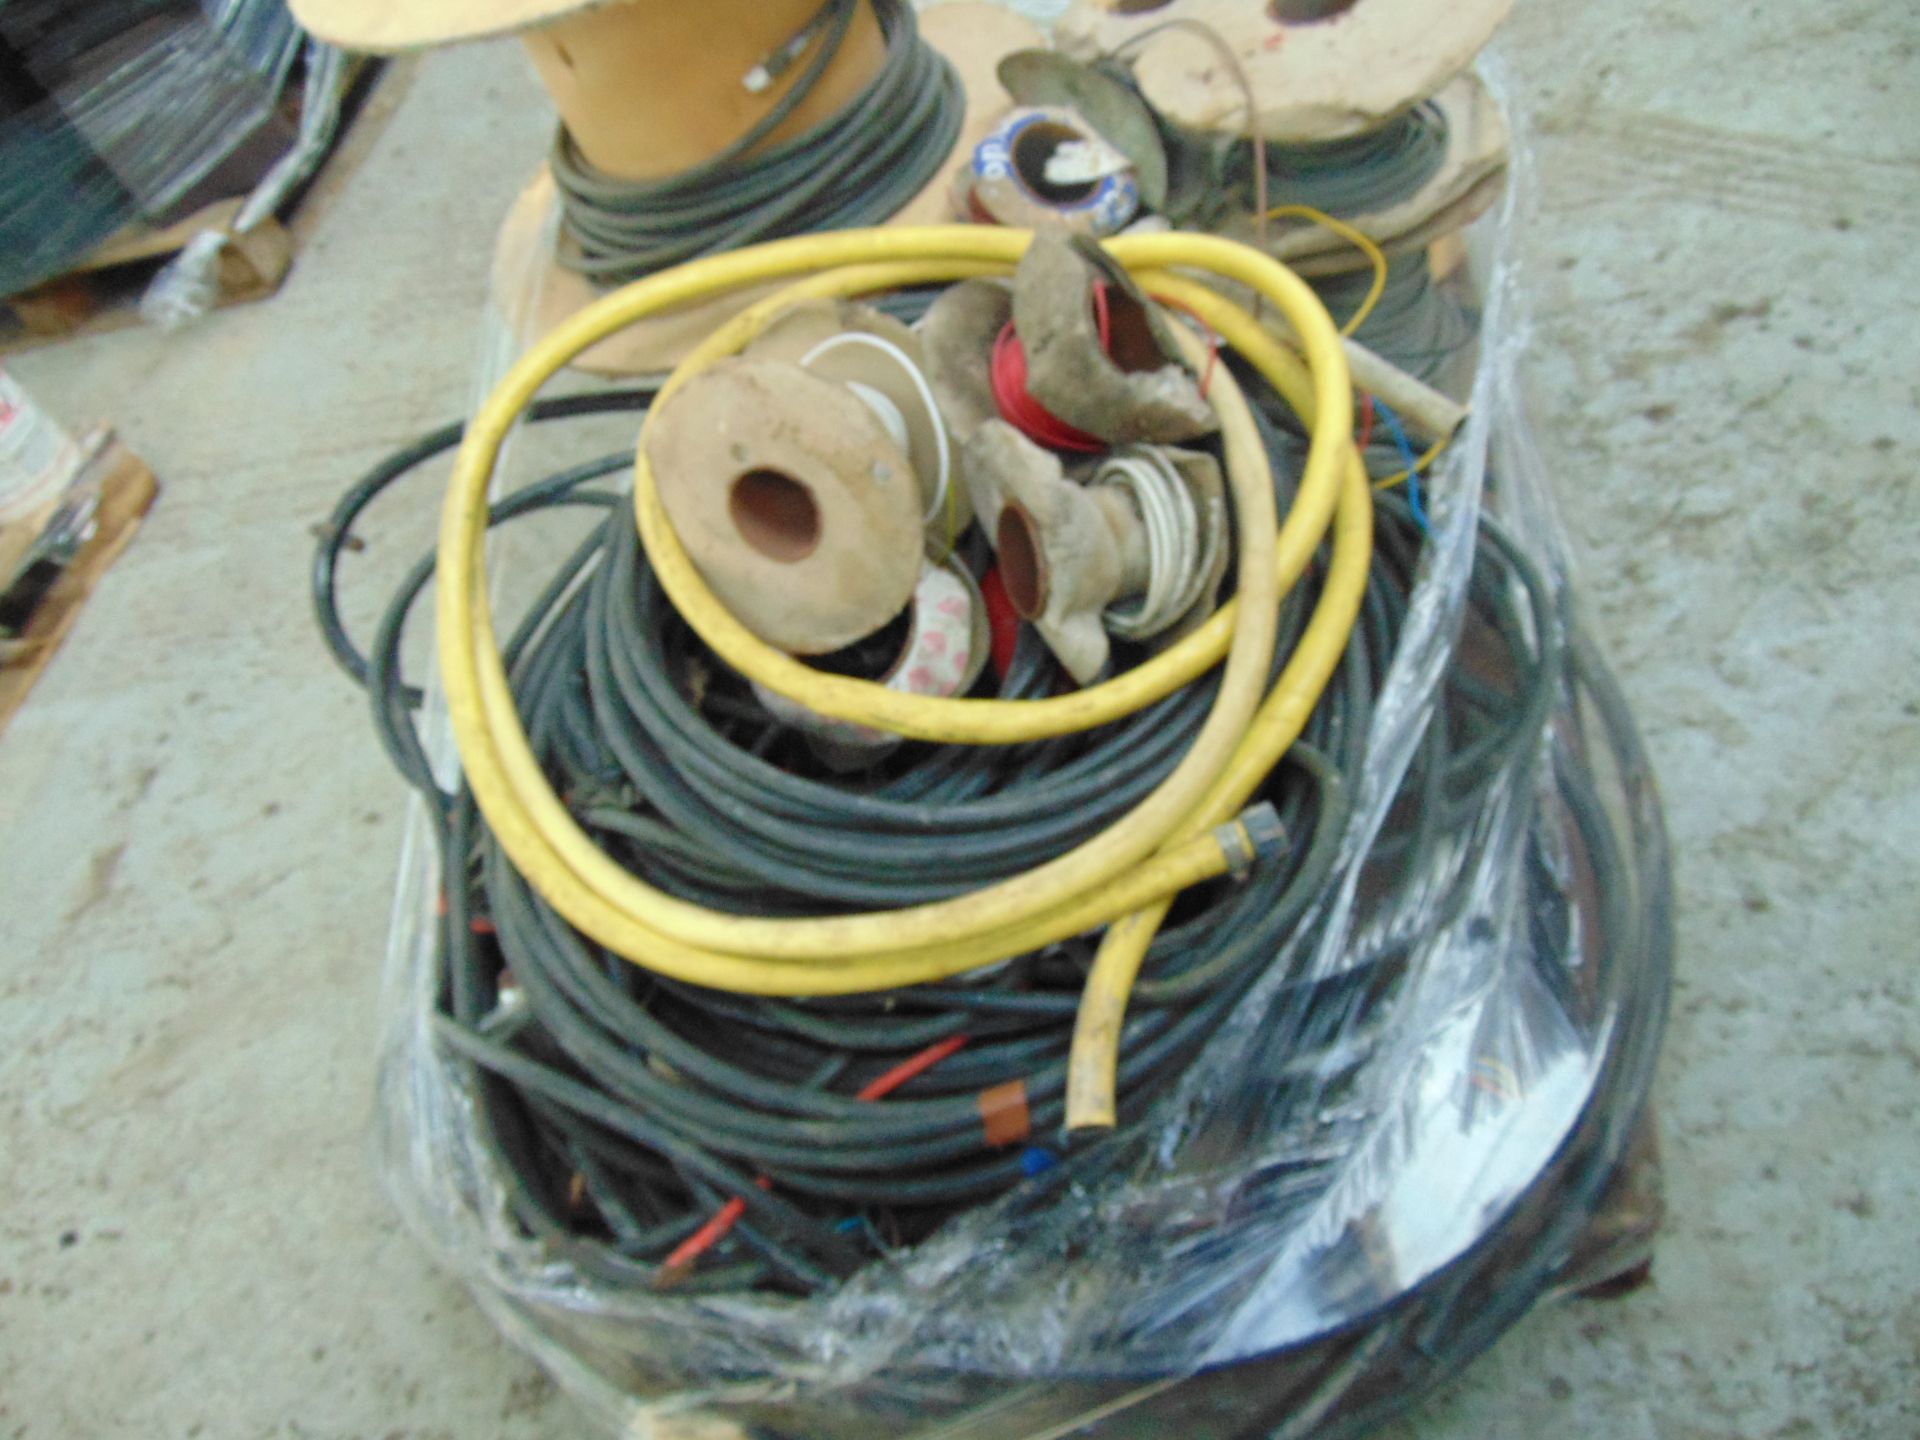 Mixed lot of electrical cable - Image 3 of 3